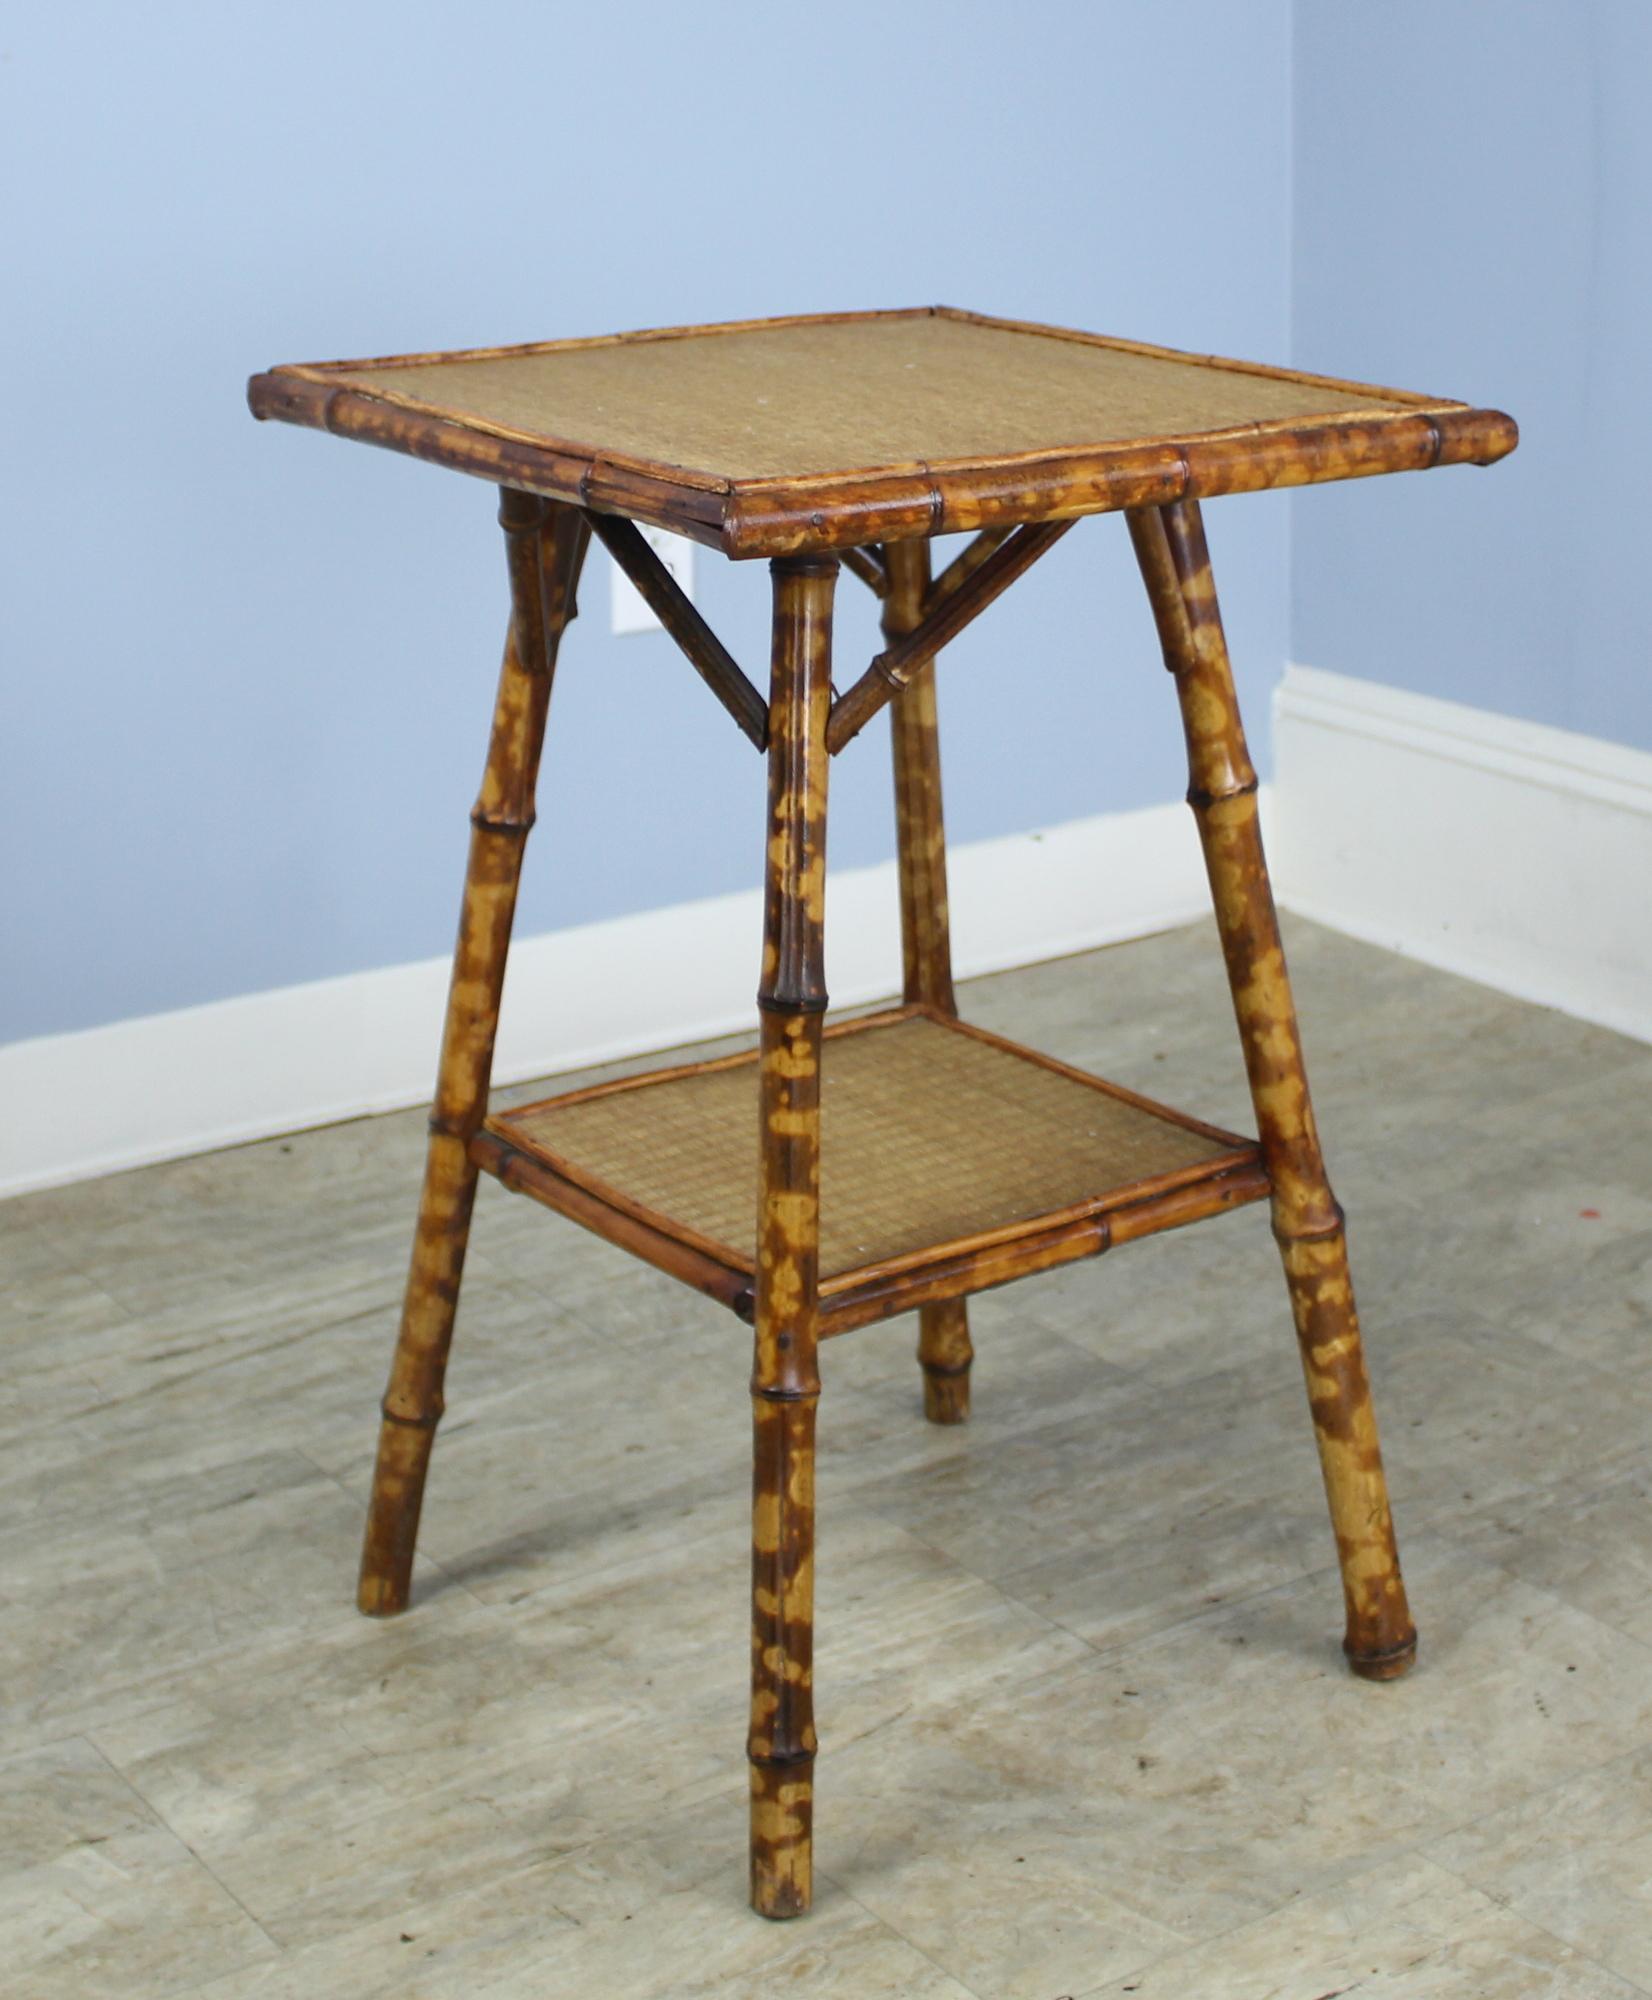 An elegant bamboo side table, with wonderful antique color and patina. The woven top and lower shelf are in very good antique condition as are the dainty legs. Charming!